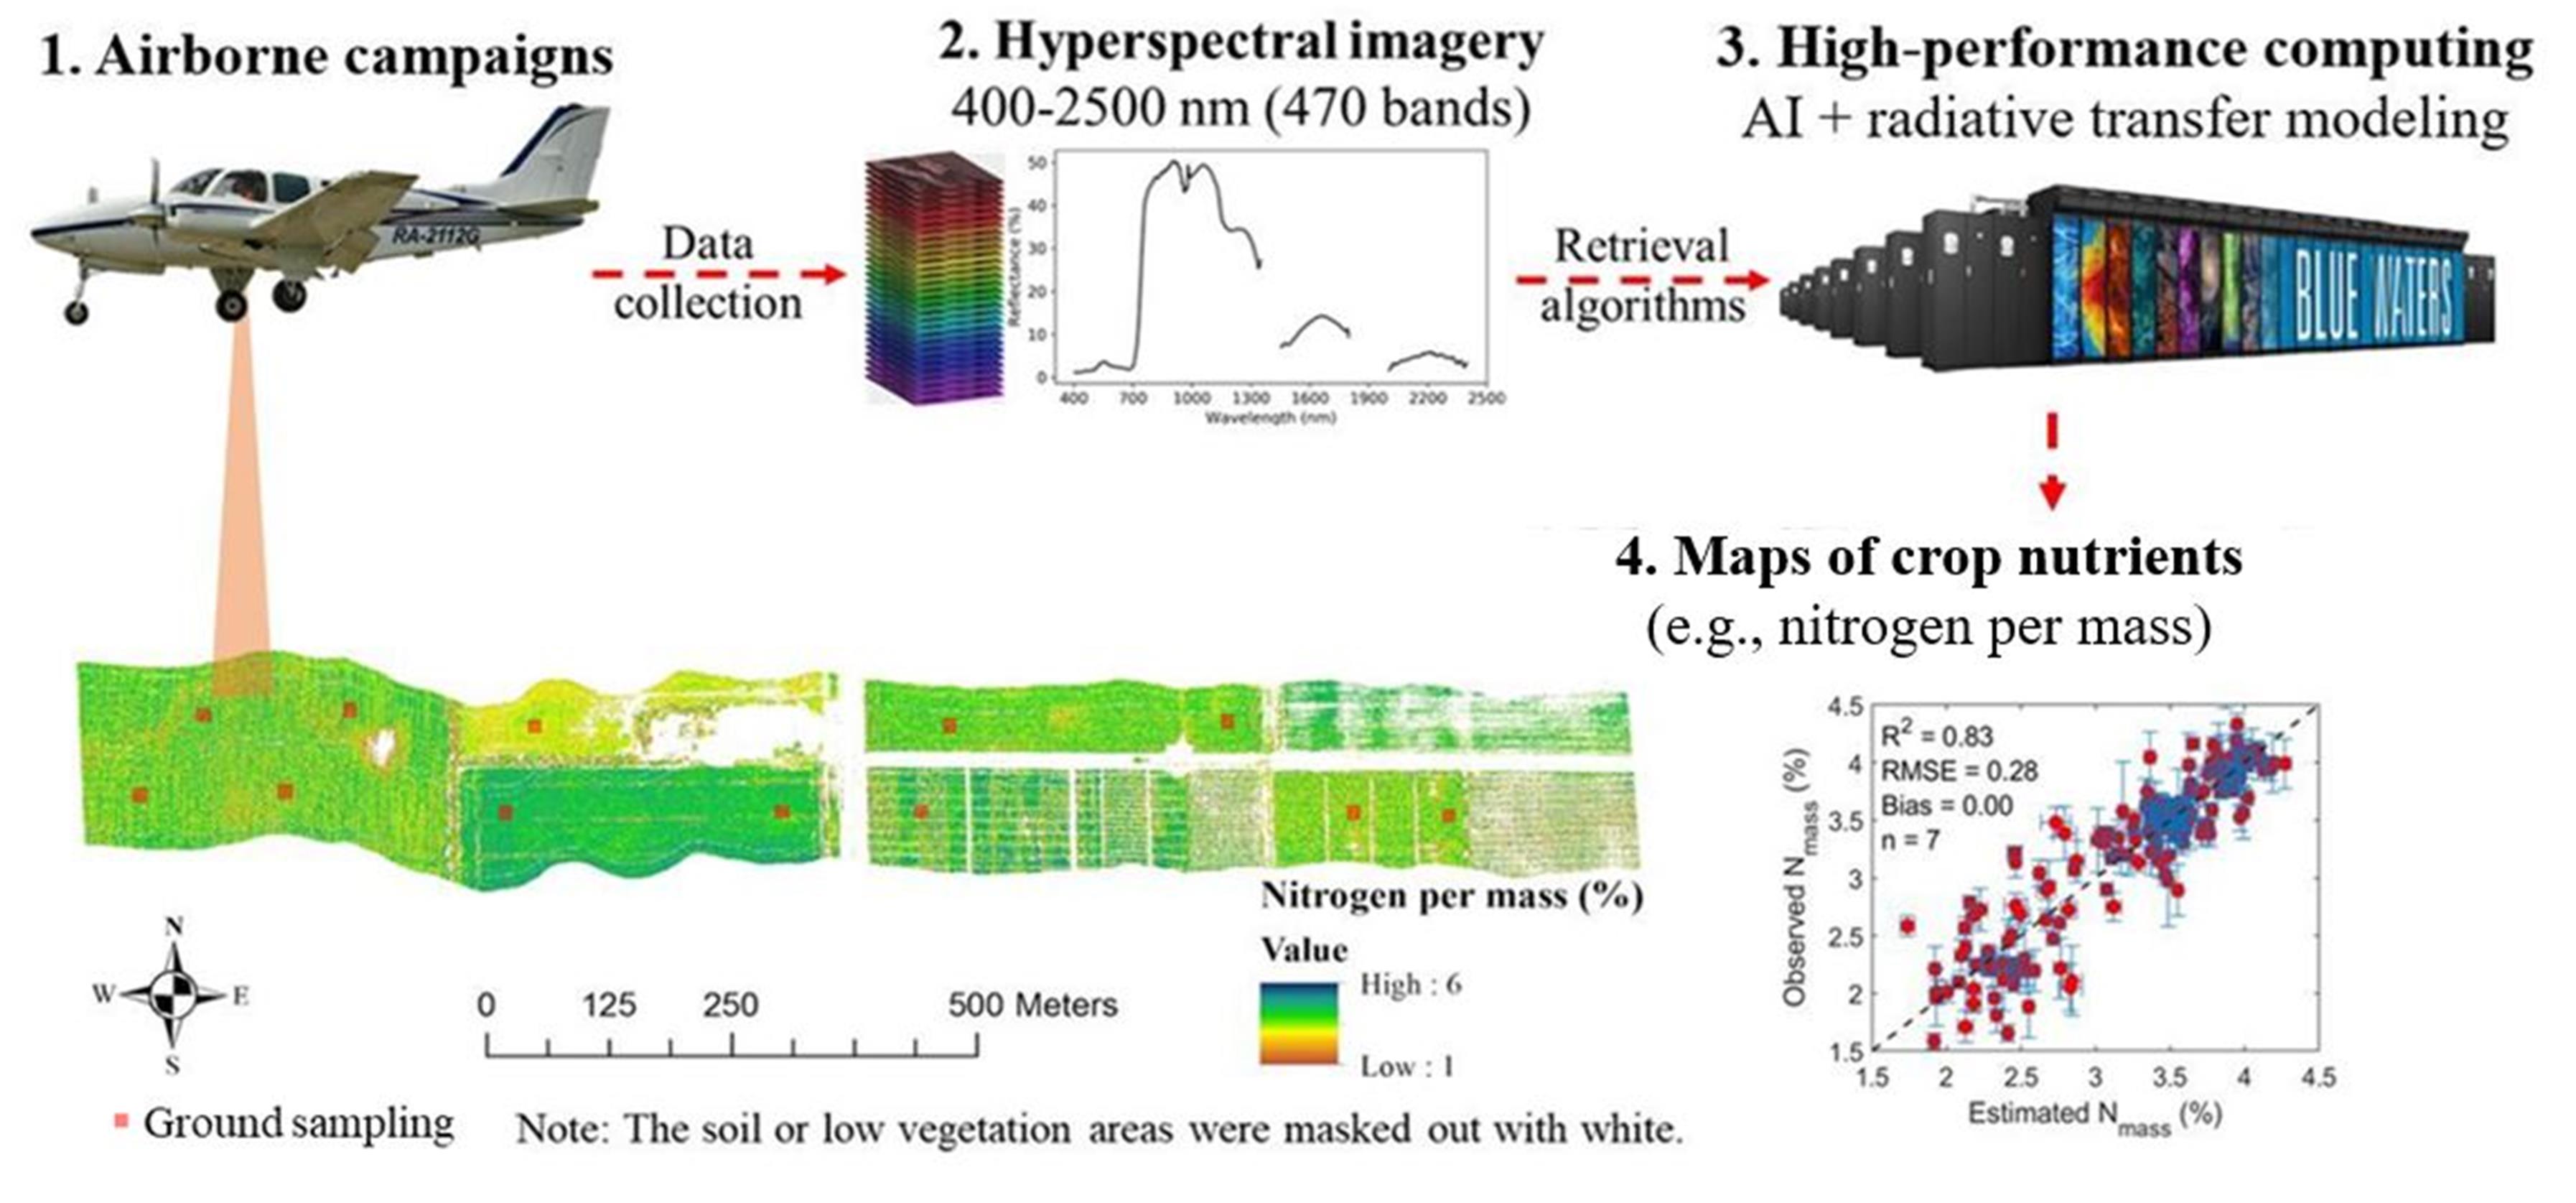 An illustration of the steps taken in the study, which include: airborne campaigns, Hyper-Spectral imagery, AI modeling, and mapping crop nutrients. 